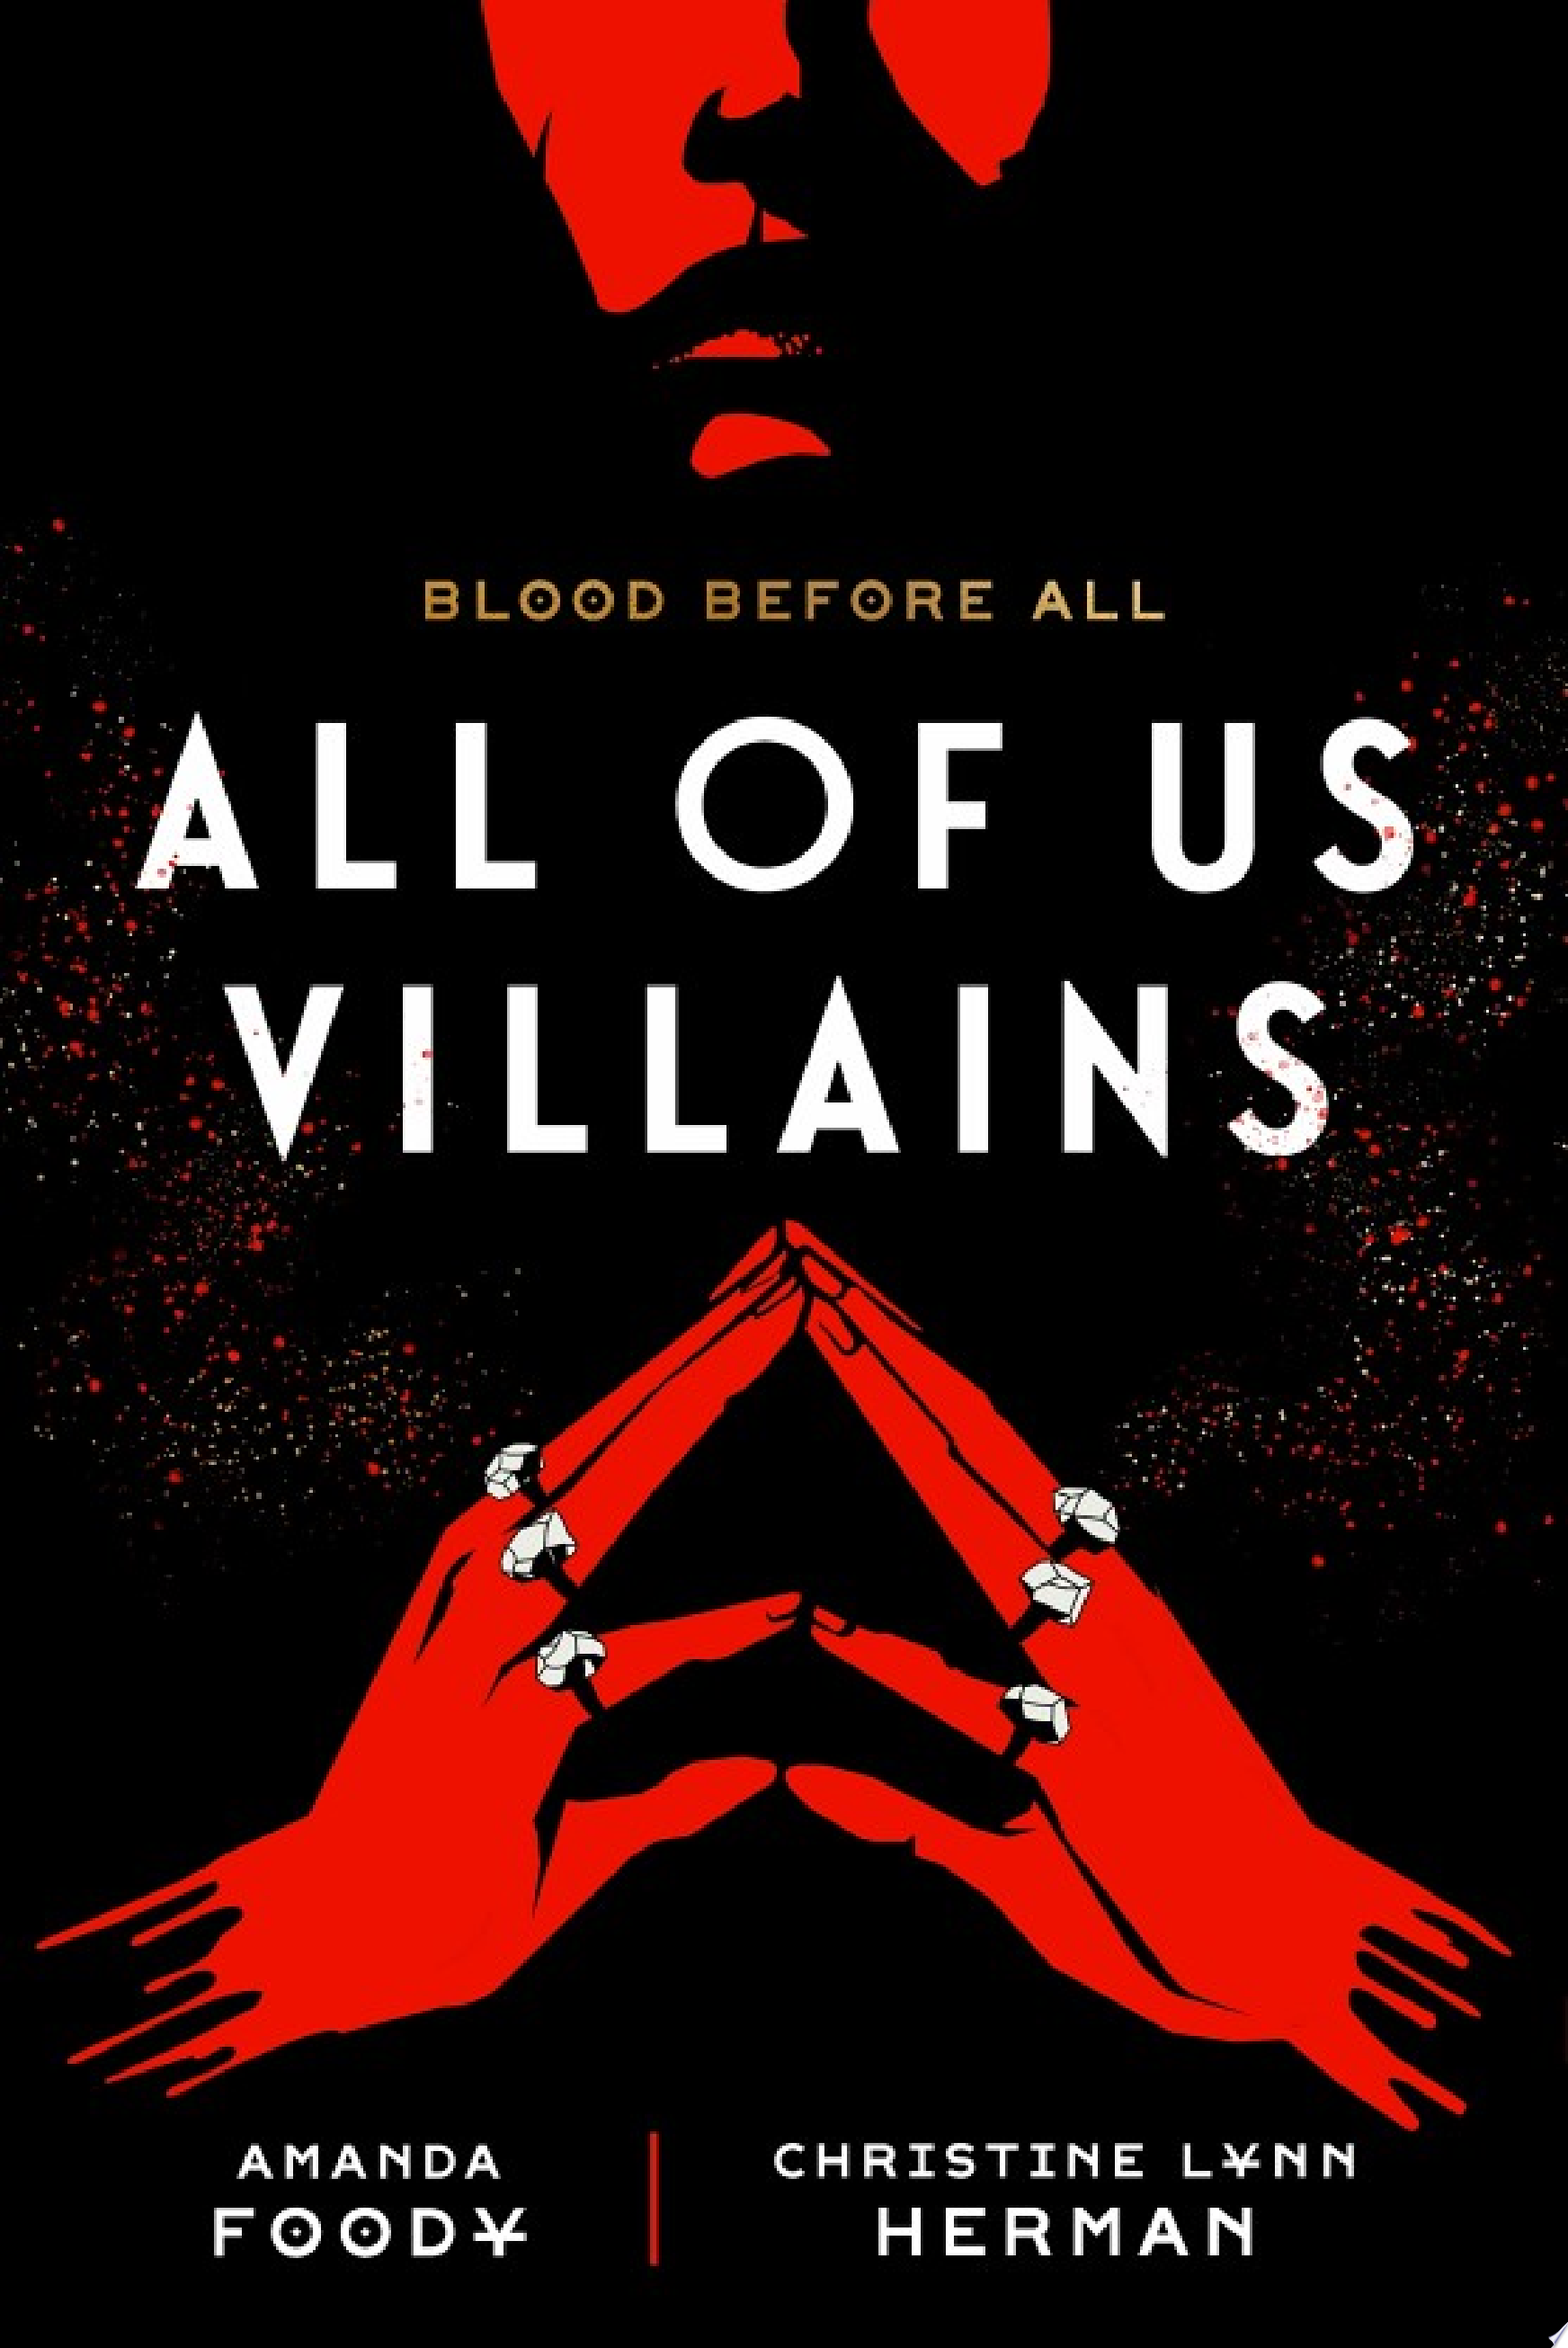 Image for "All of Us Villains"